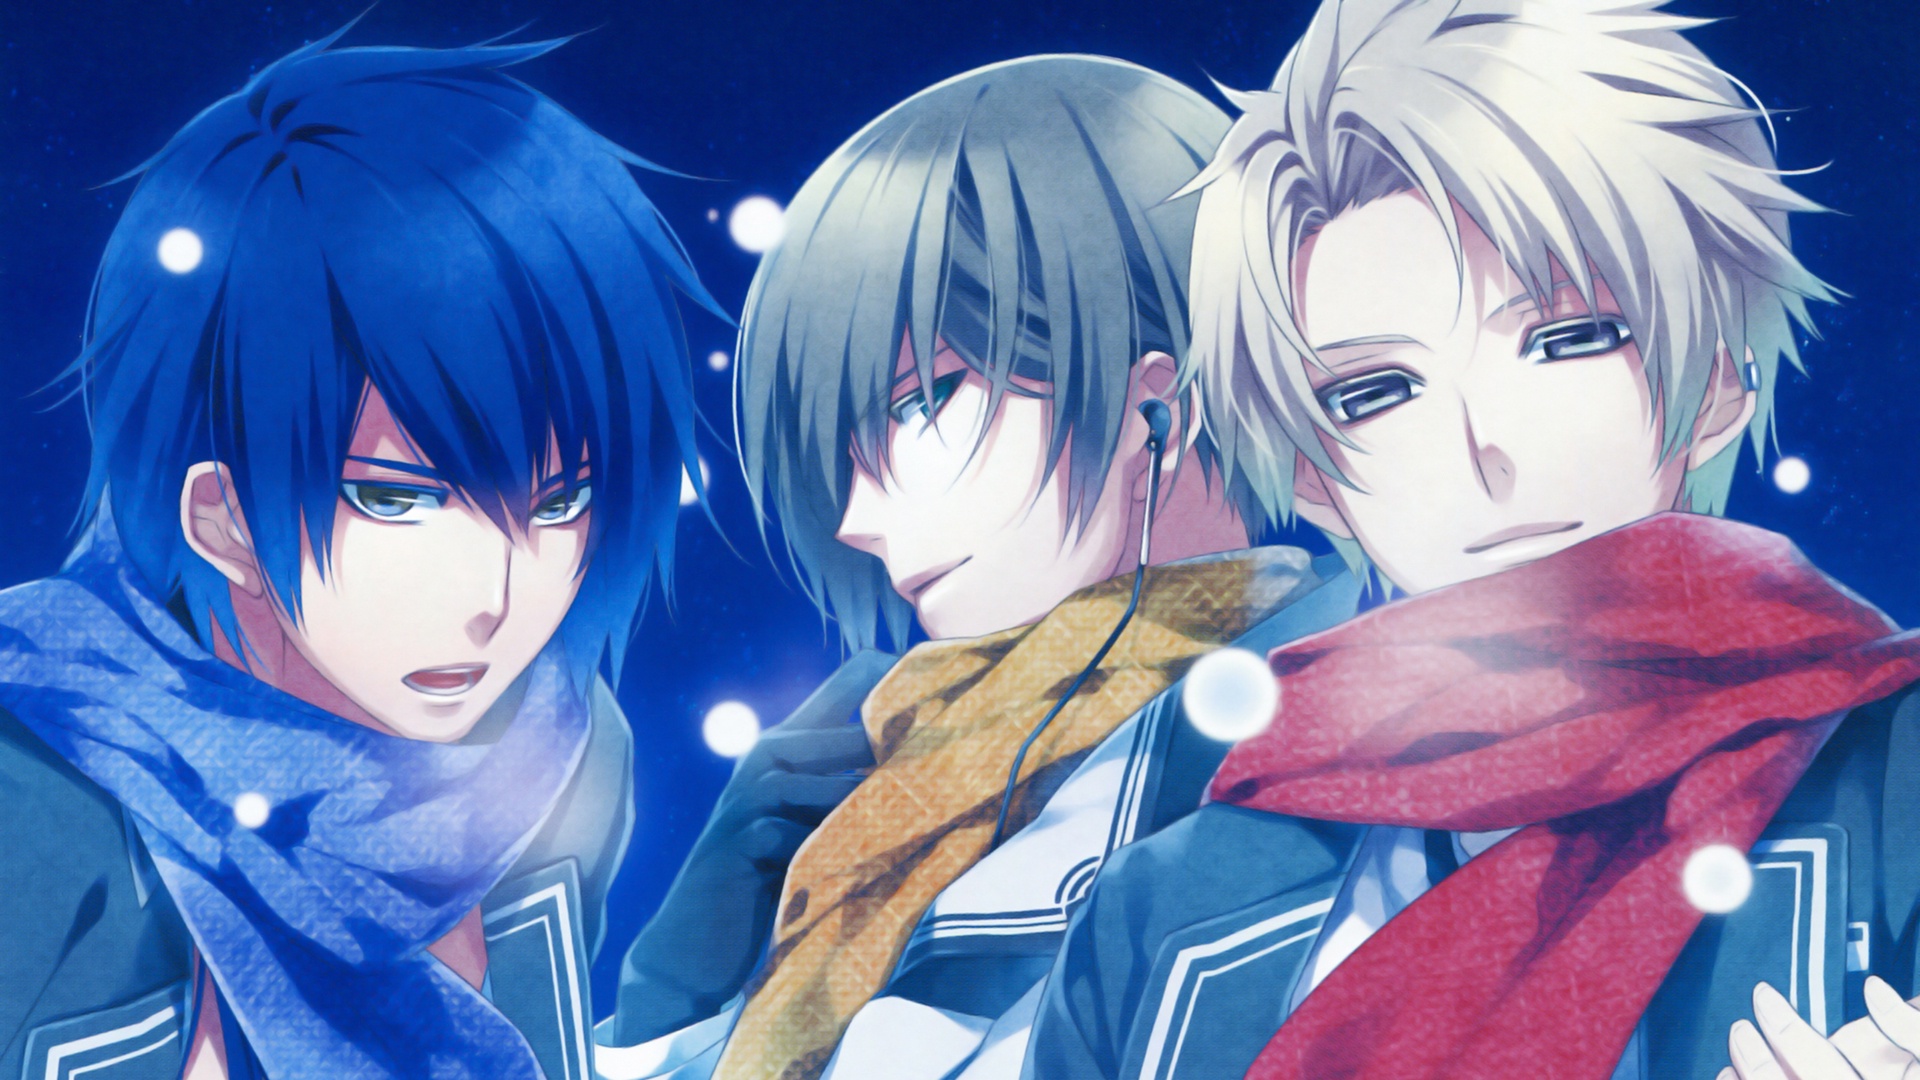 Anime Norn9: Norn + Nonette HD Wallpaper | Background Image